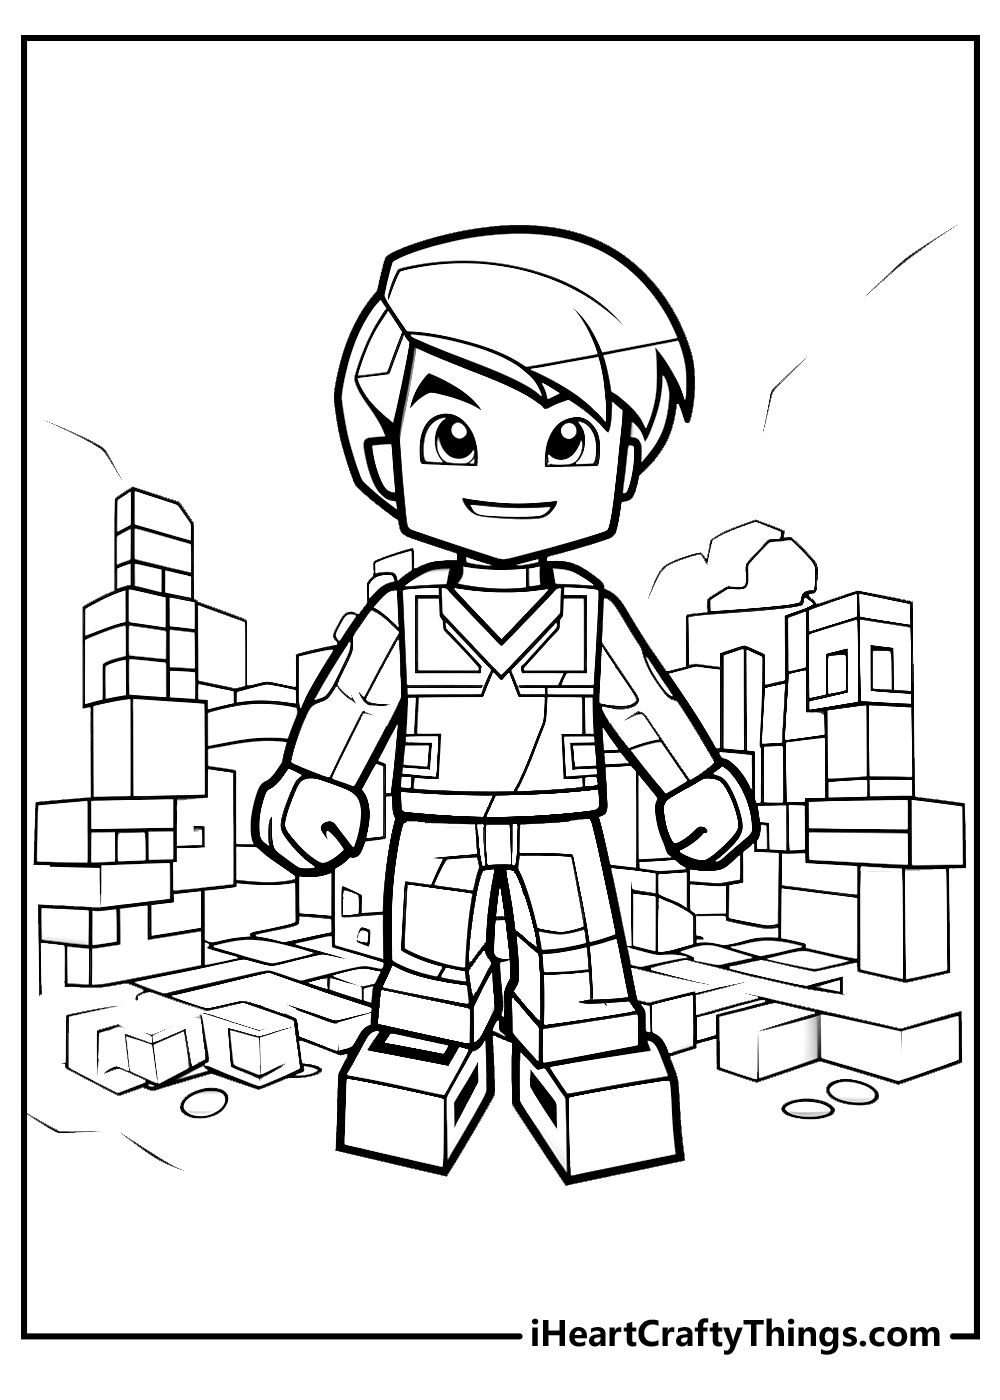 Free Roblox Doors Coloring Pages: Printable and Easy to Print Sheets